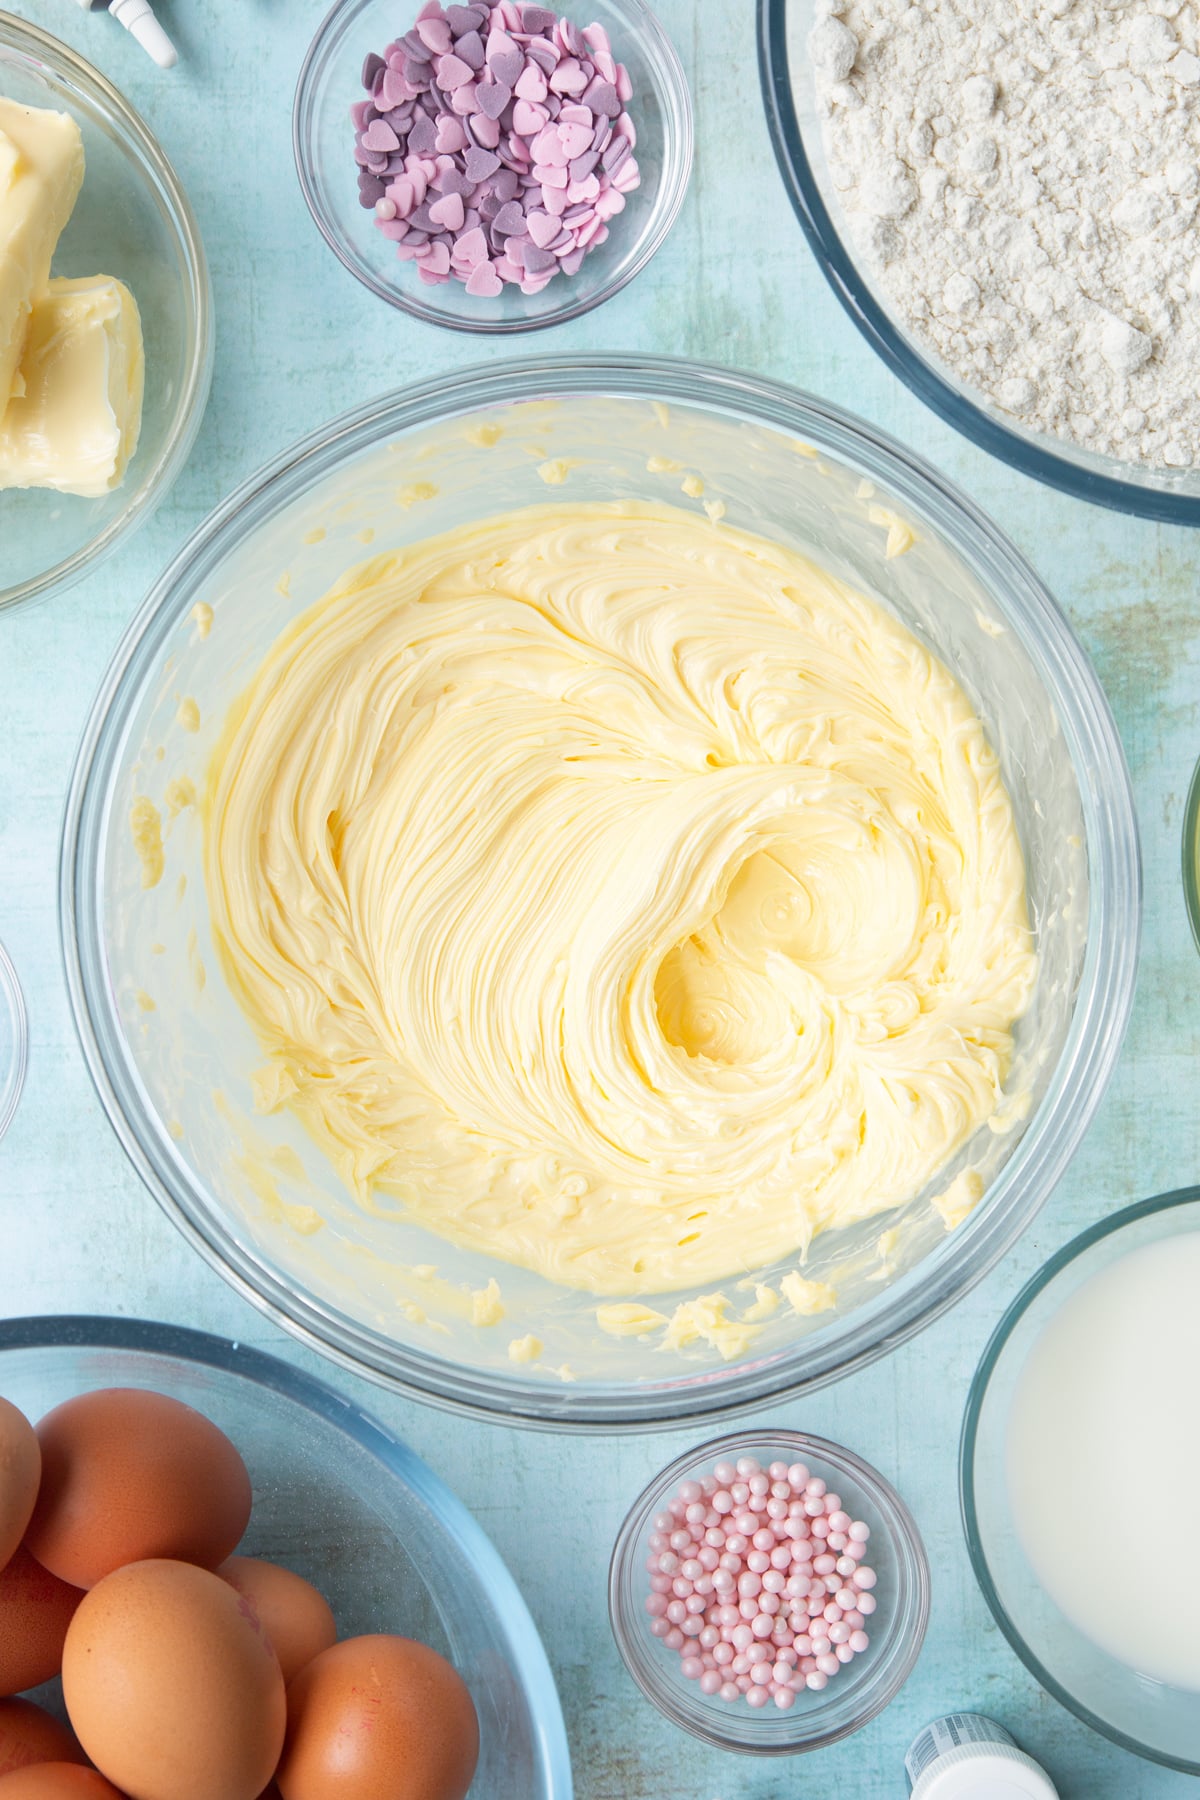 Whipped butter in a mixing bowl. Ingredients to make pink ombre cake surround the bowl.